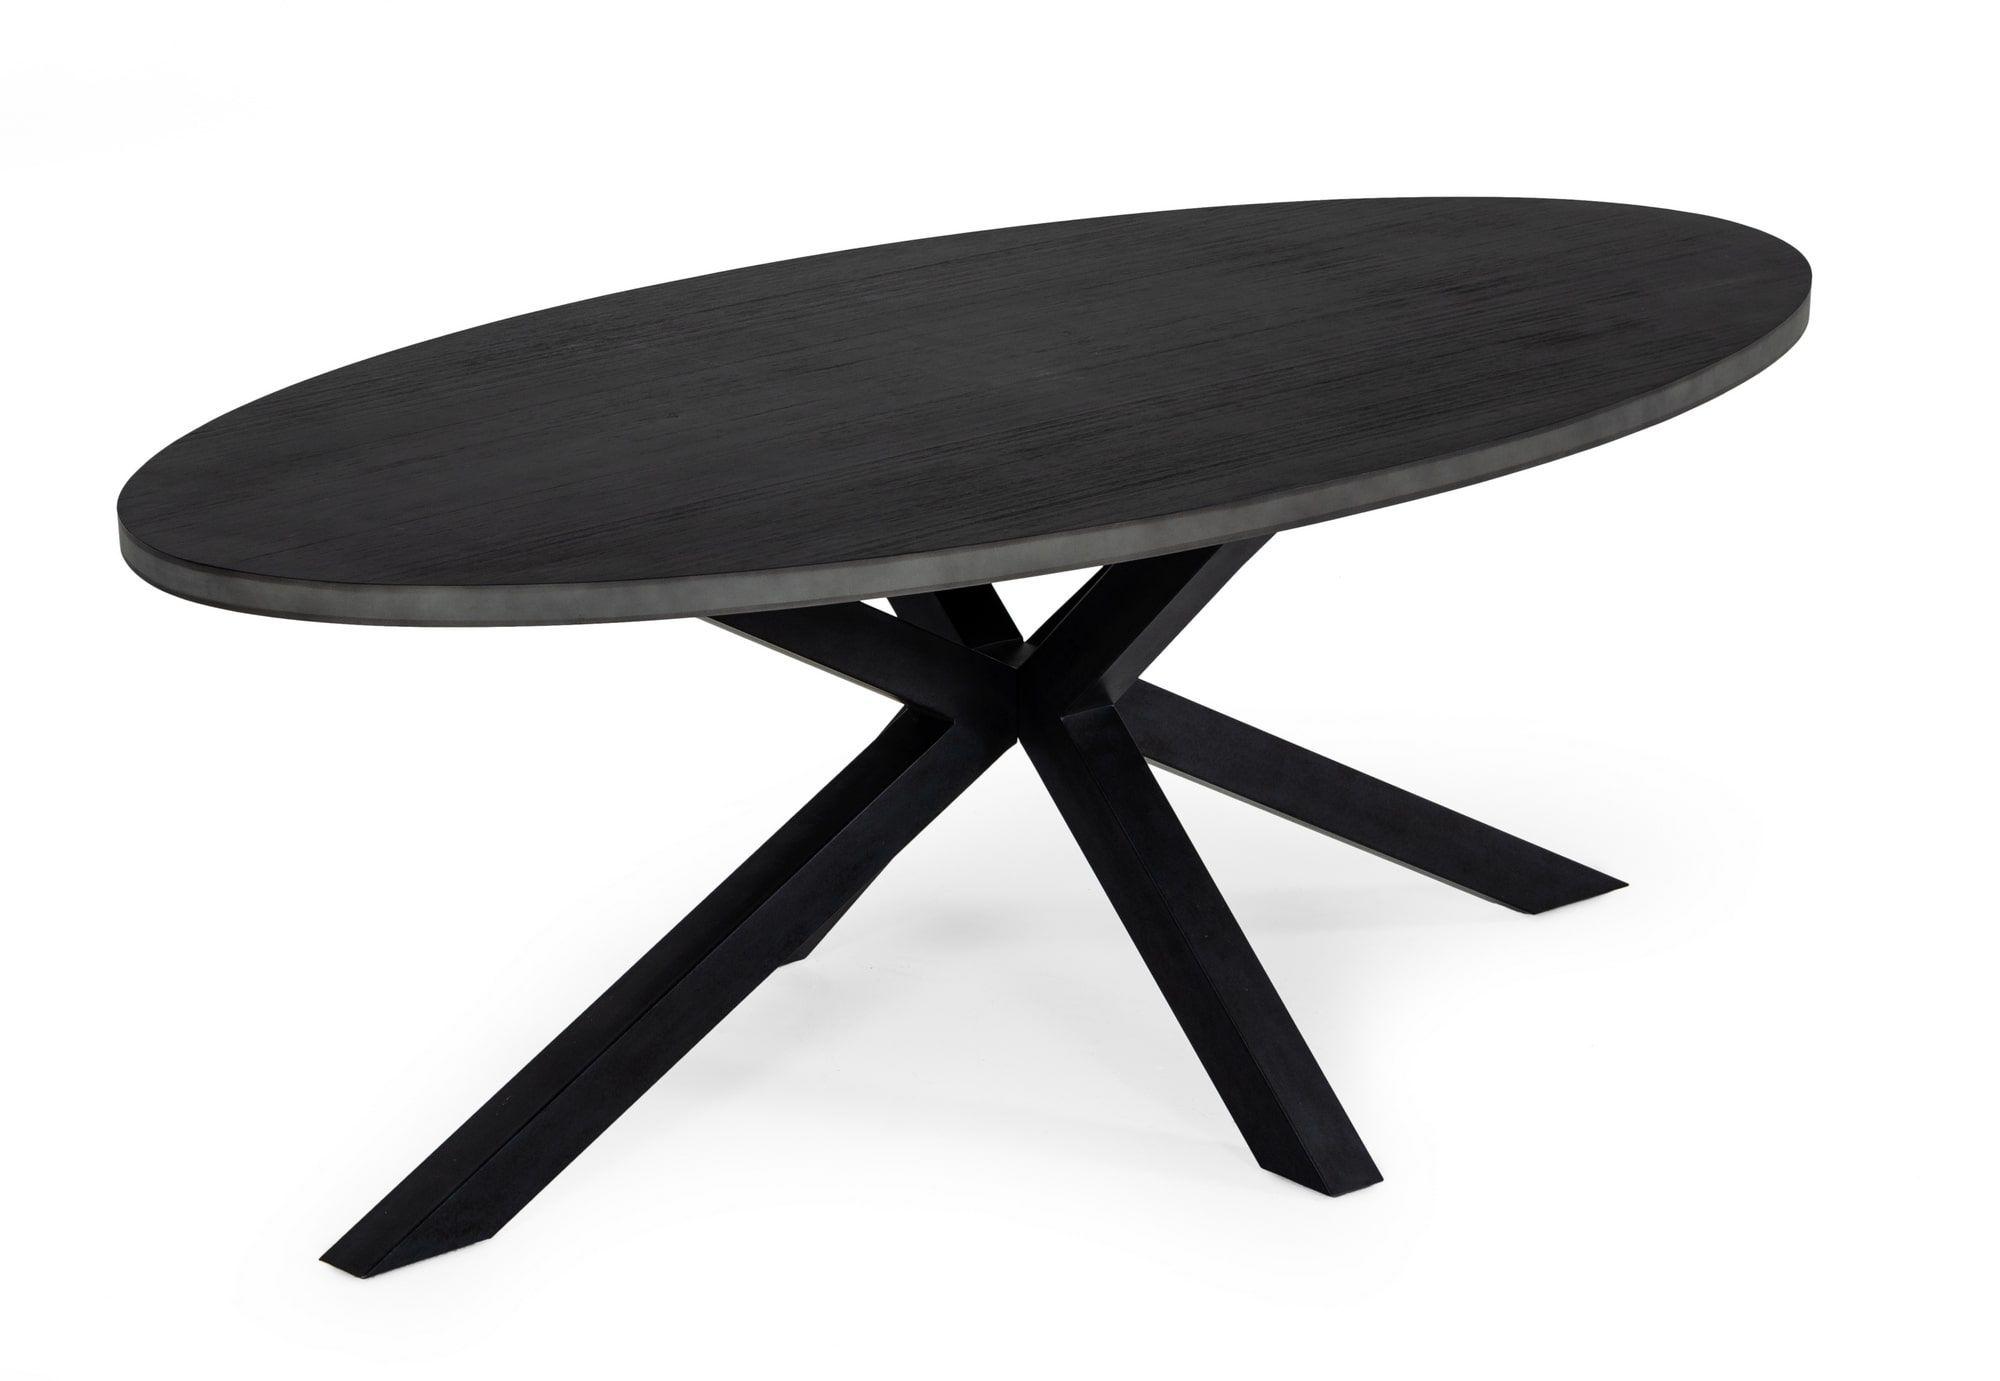 Contemporary, Modern Dining Table Raygor VGWH191420301 in Black 